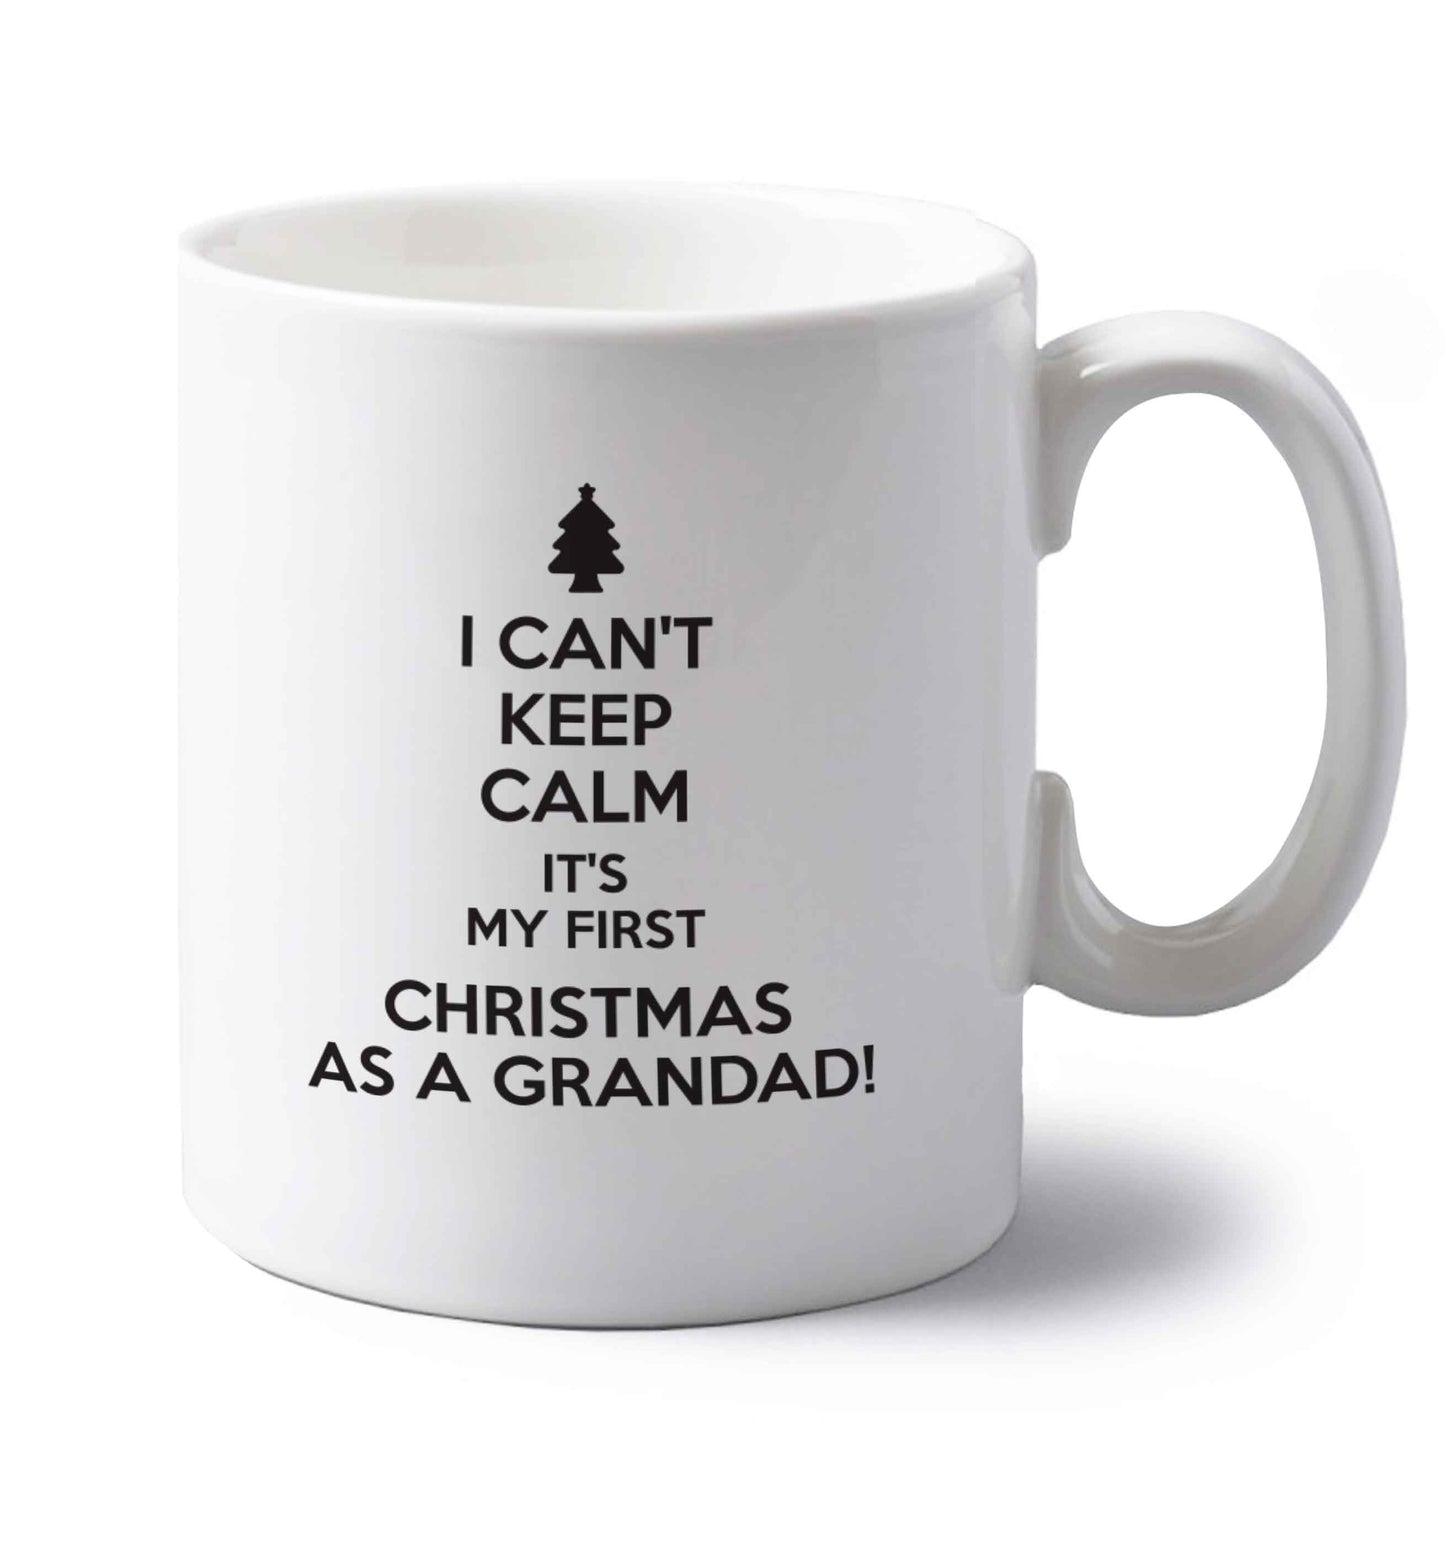 I can't keep calm it's my first Christmas as a grandad! left handed white ceramic mug 